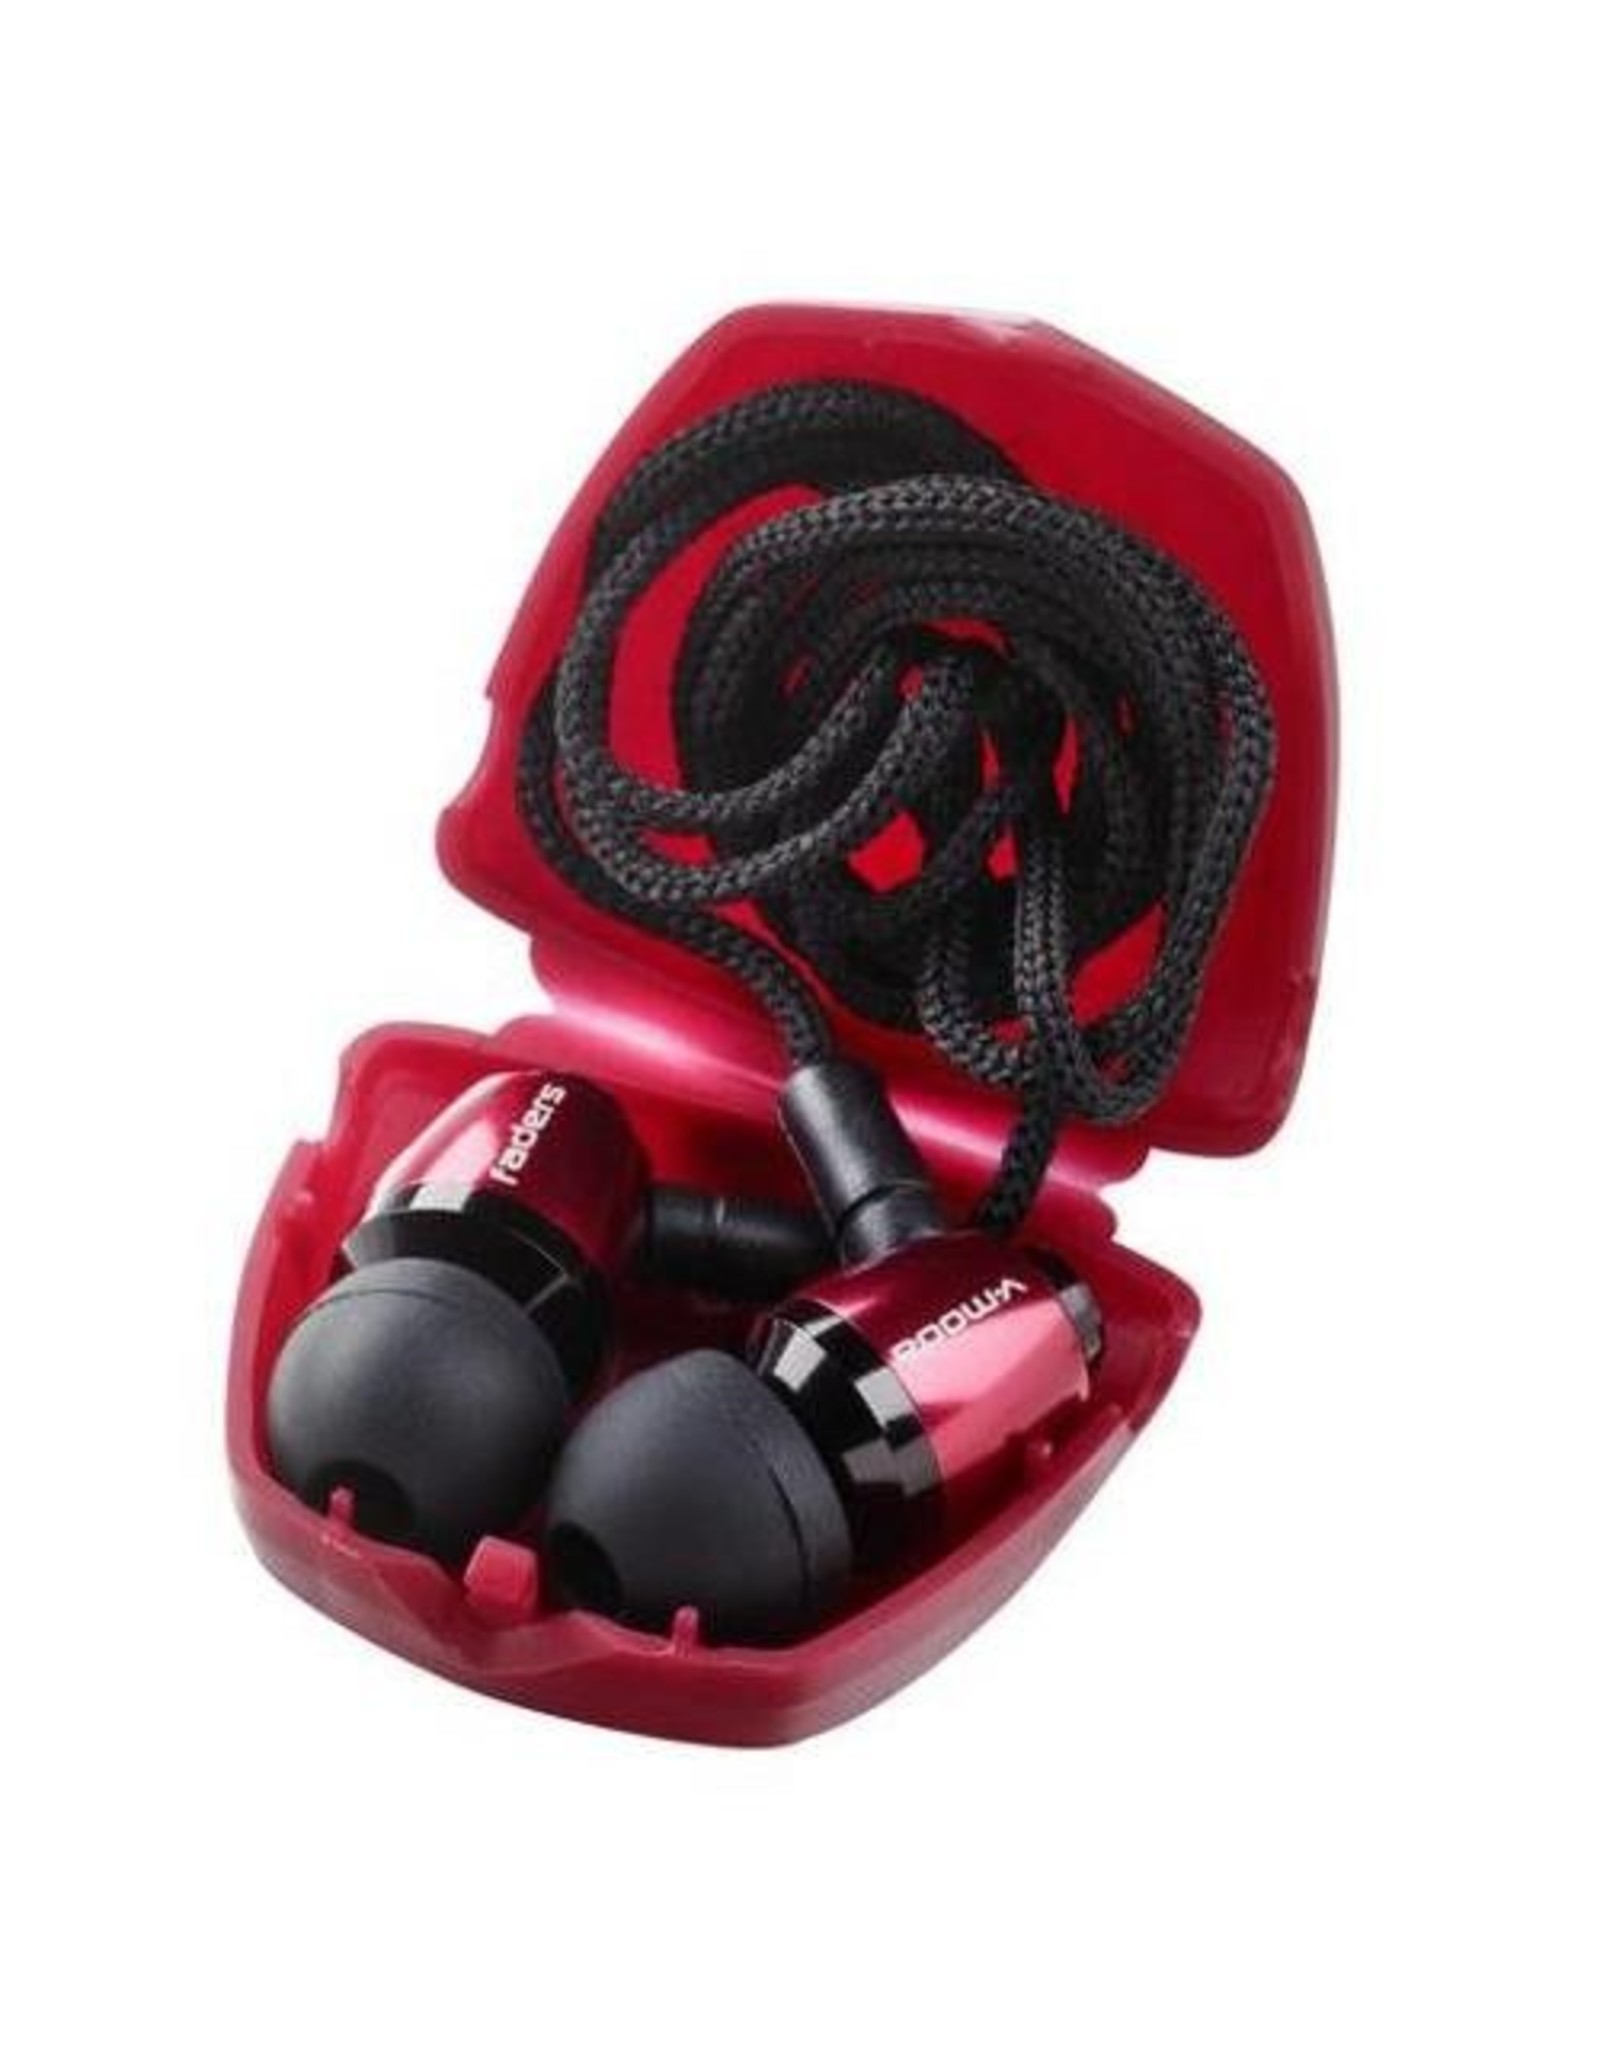 V-MODA  EA-VFD-RD faders Vip electro rouge - red hearing protection